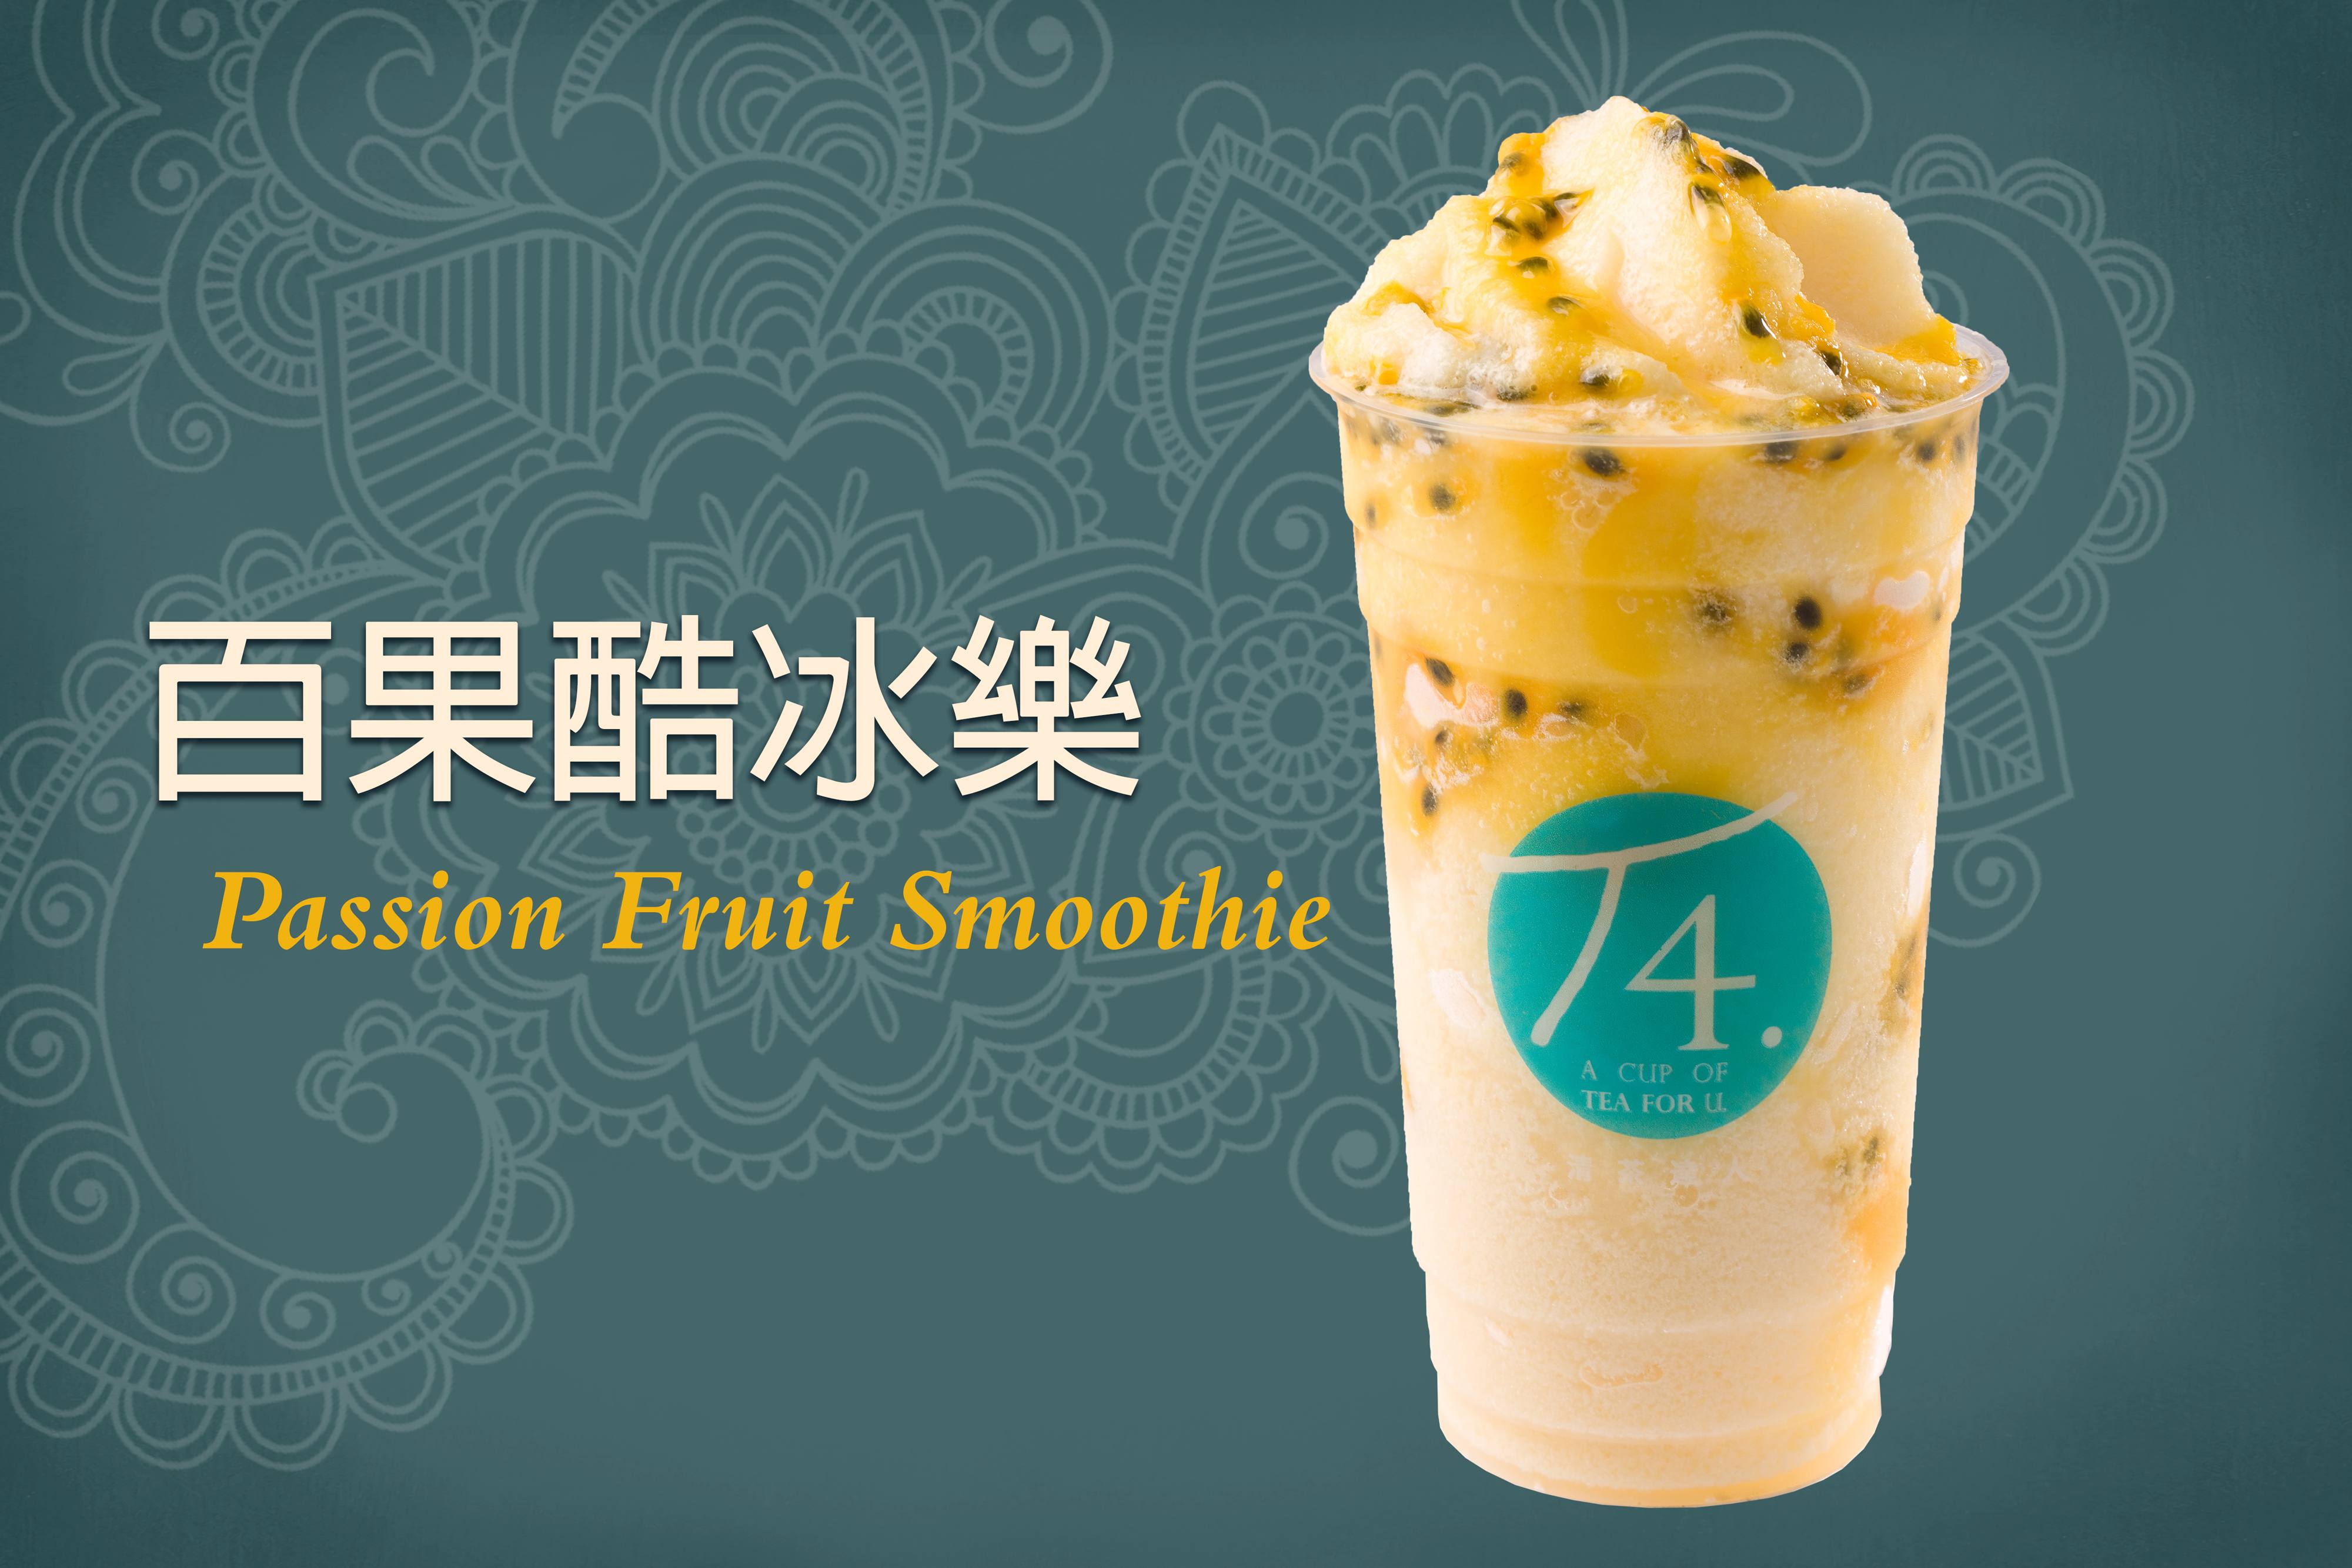 Passion Fruit Smoothie 